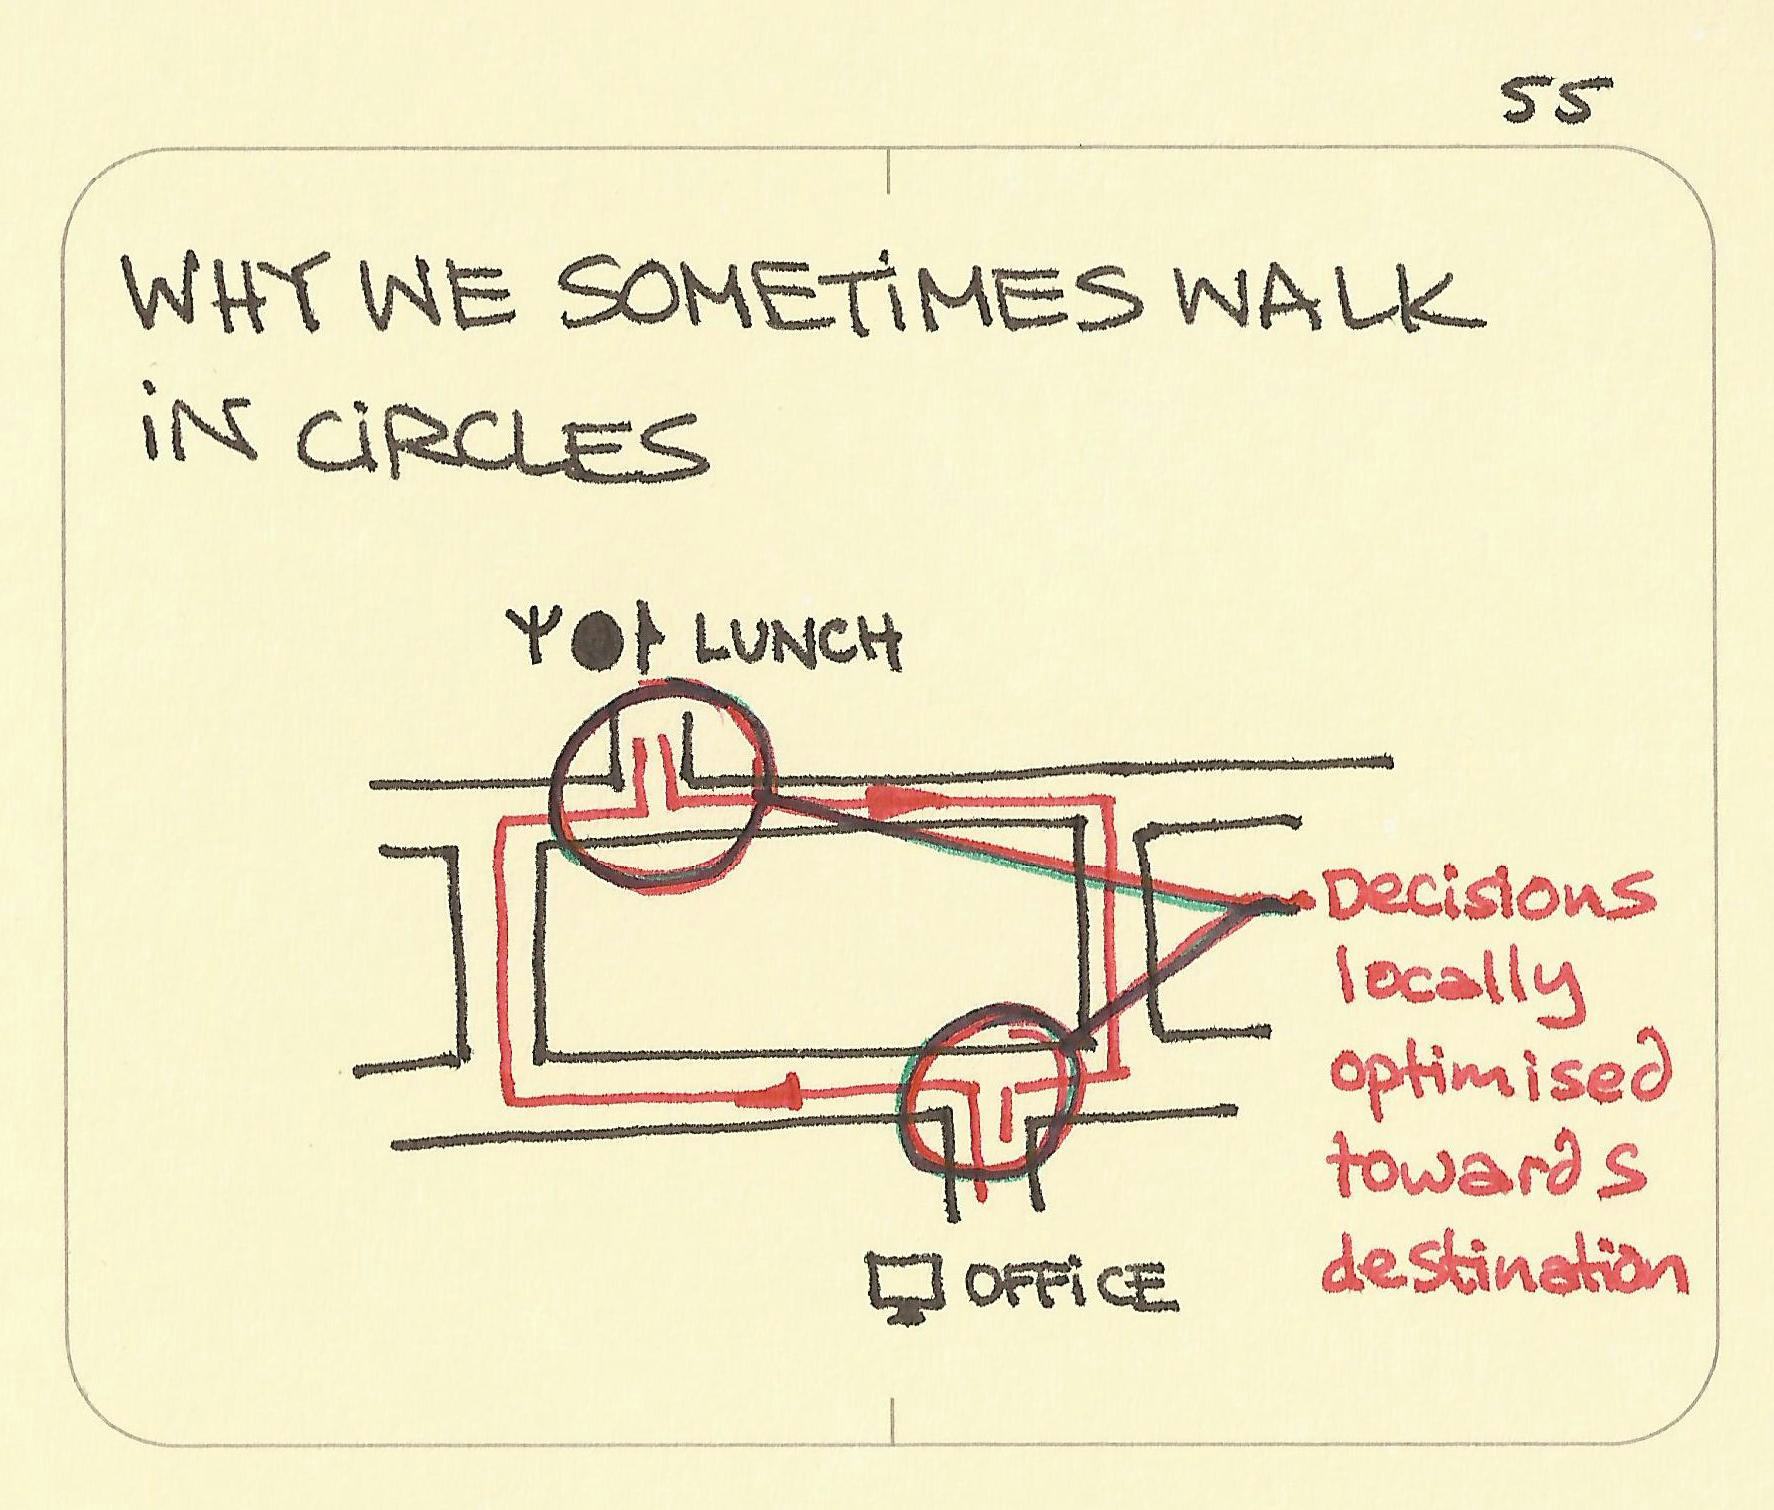 Why we sometimes walk in circles - Sketchplanations